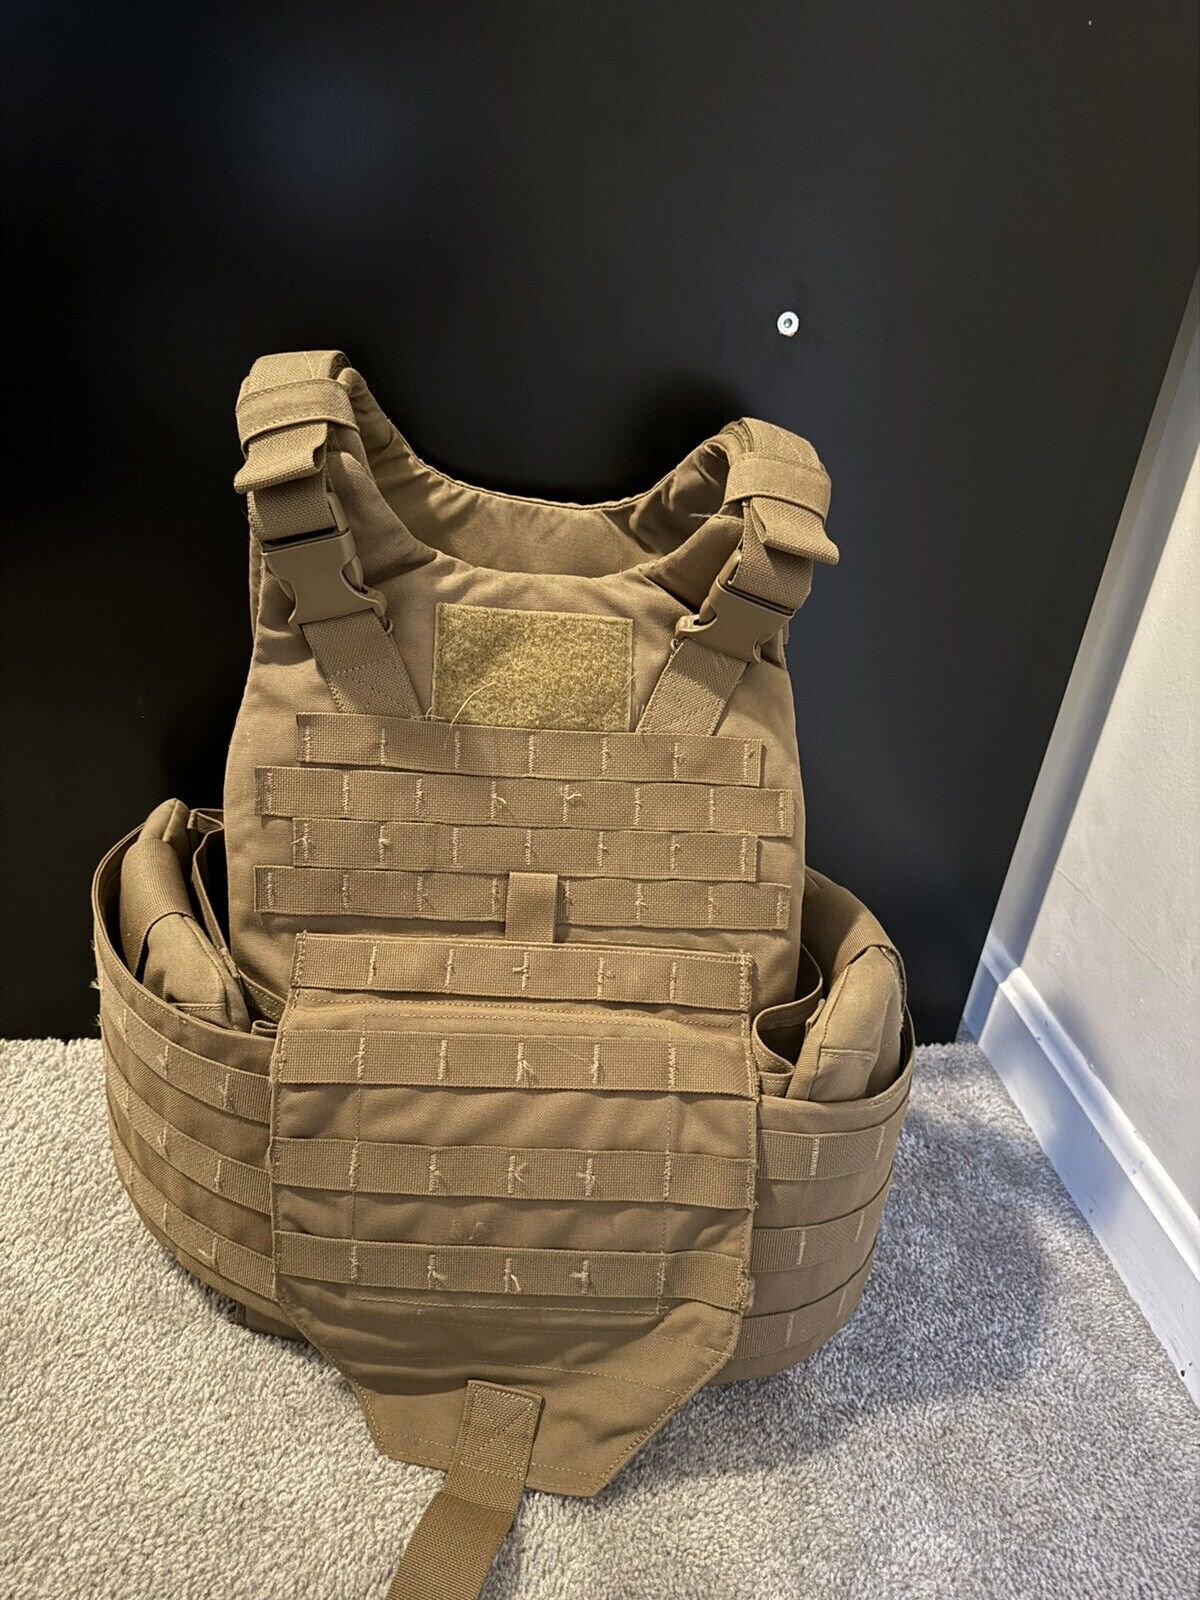 USMC Plate Carrier Large with set of soft armor - CIF turn in